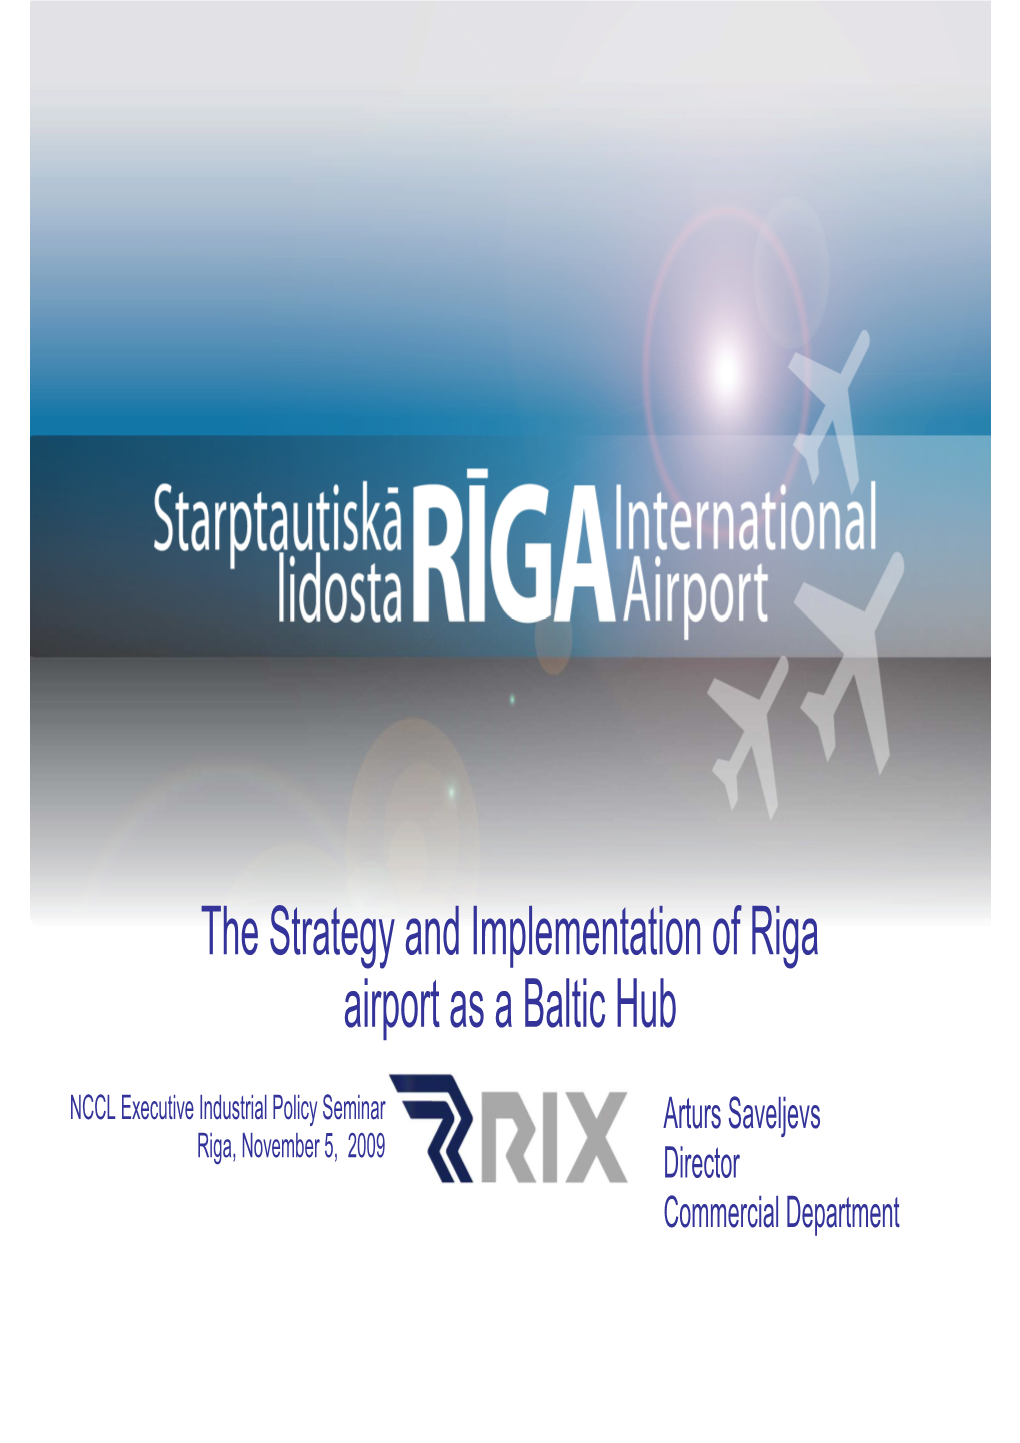 The Strategy and Implementation of Riga Airport As a Baltic Hub